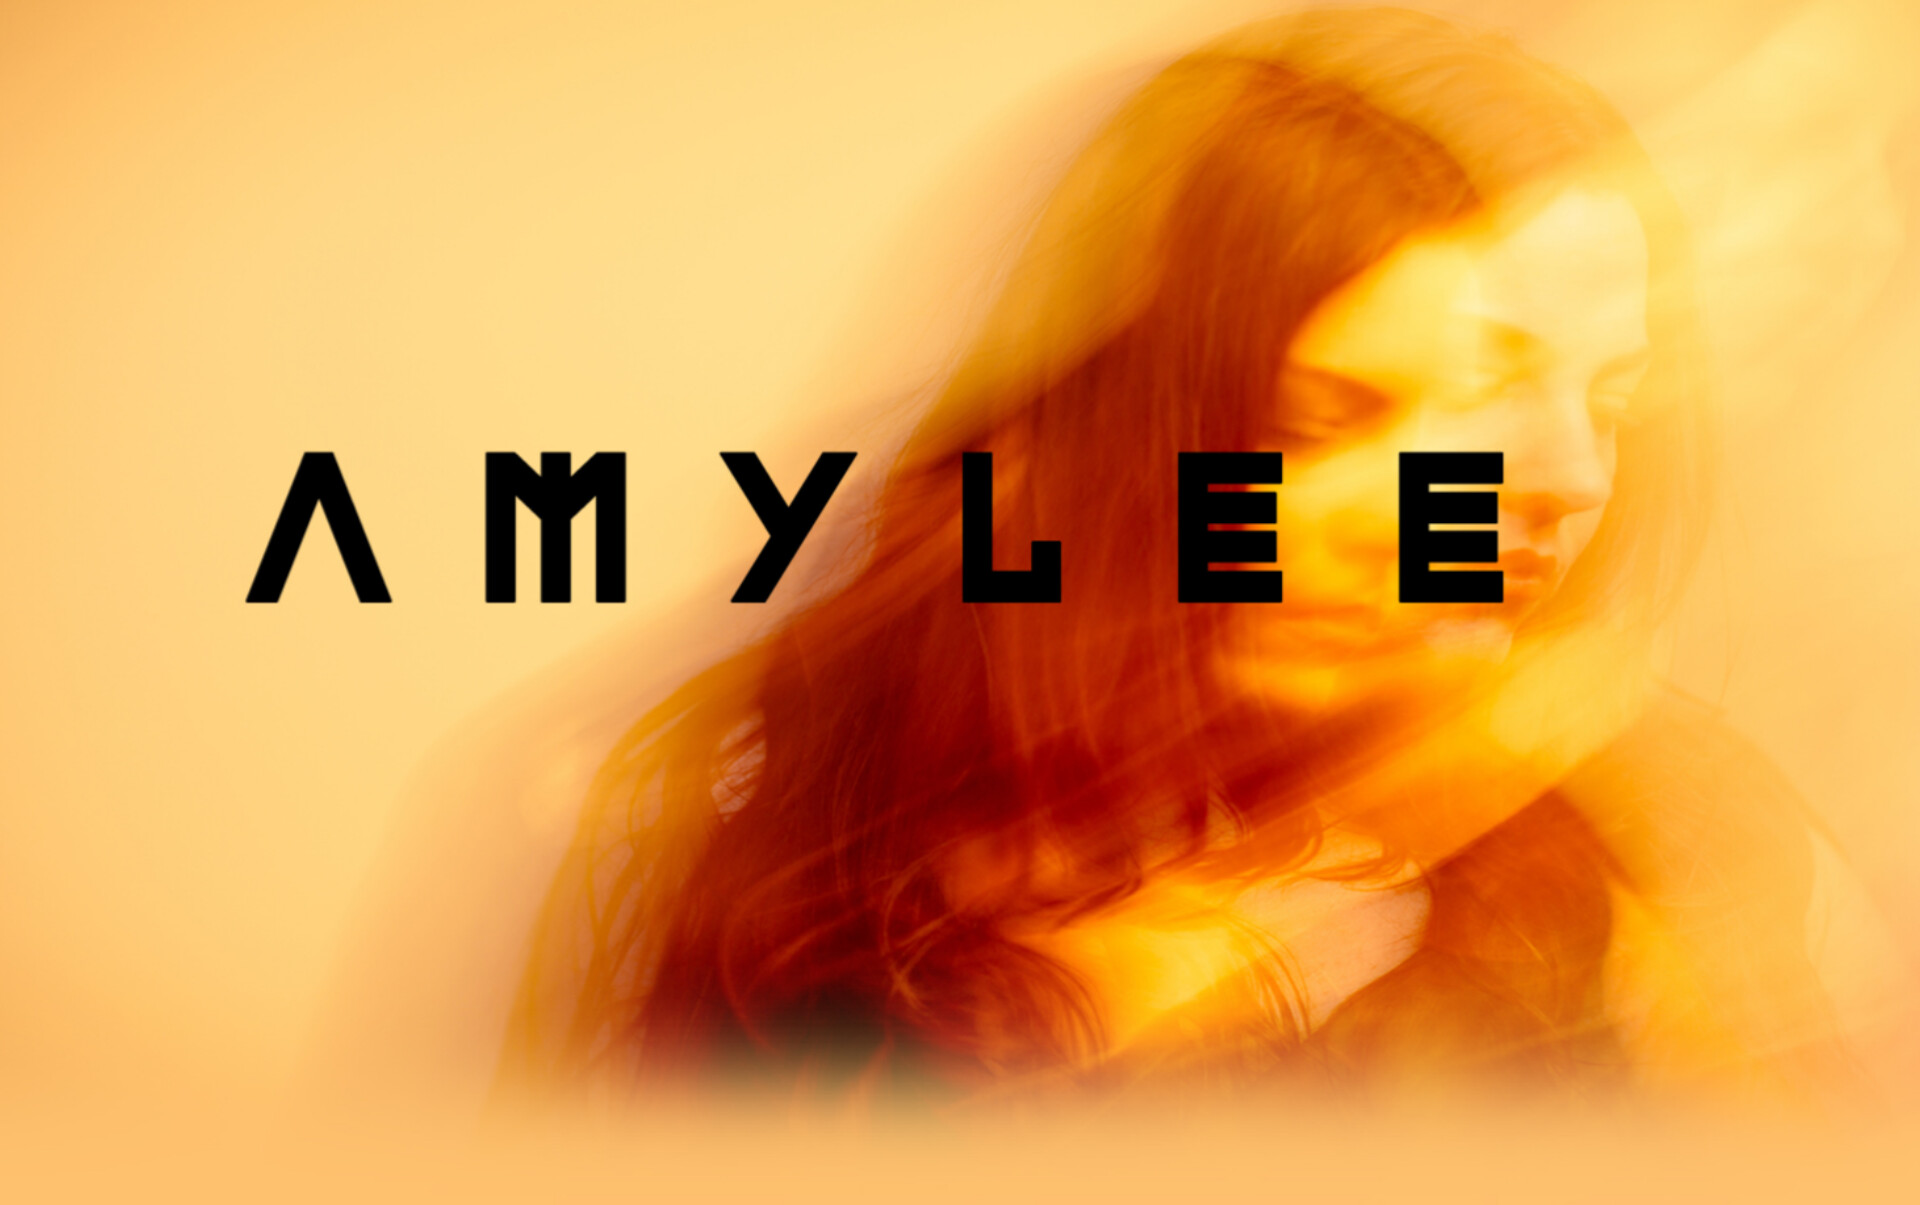 1920x1205
Keywords: amy lee;recover;photoshoot;covers;2016